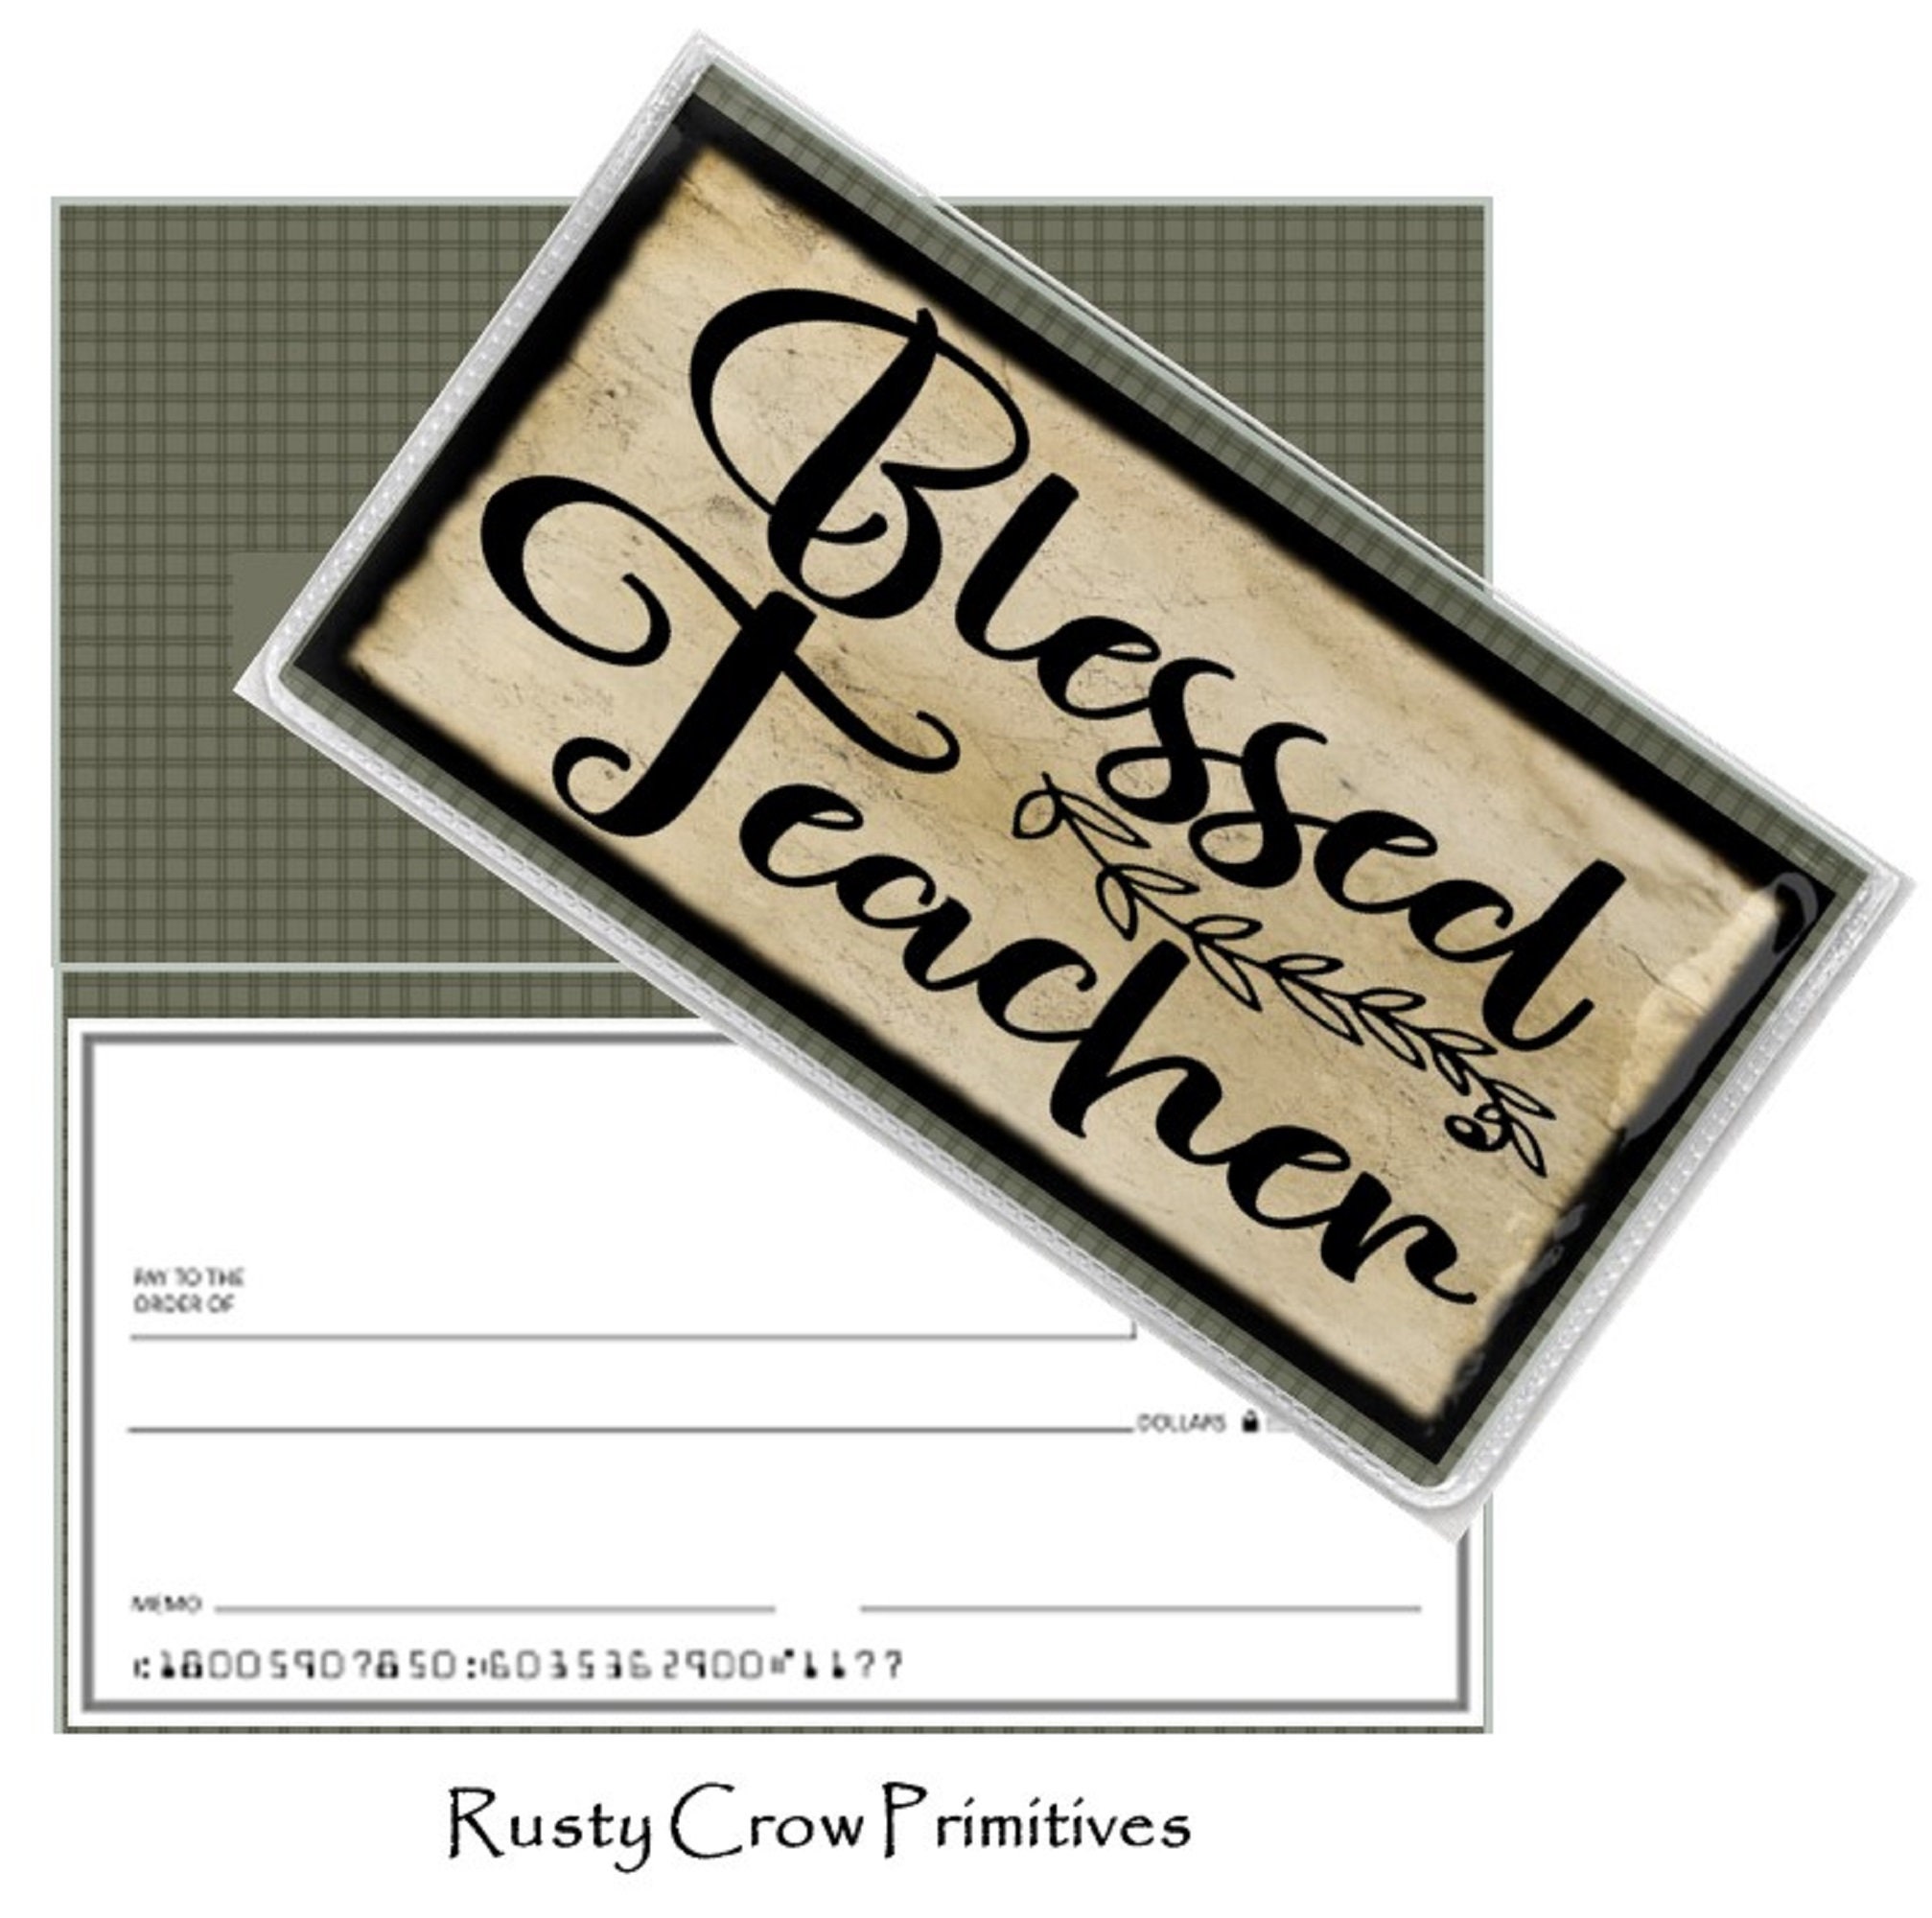 Blessed Teacher: Teacher Memory Book, Record what your student say